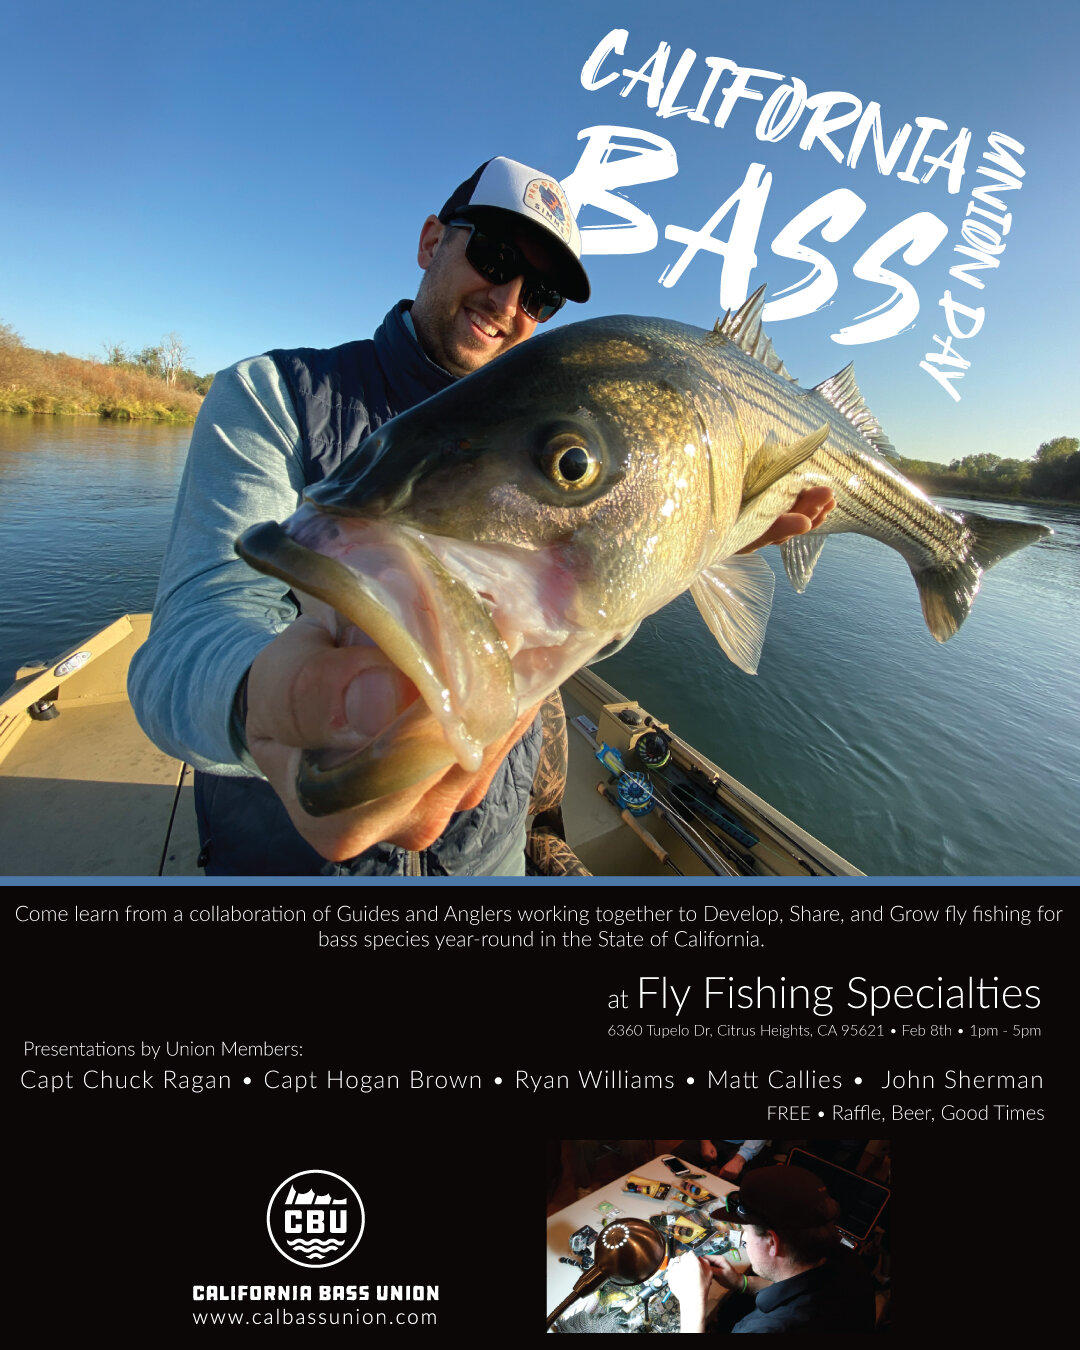 Cal Bass Union Day @ Fly Fishing Specialties — California Bass Union